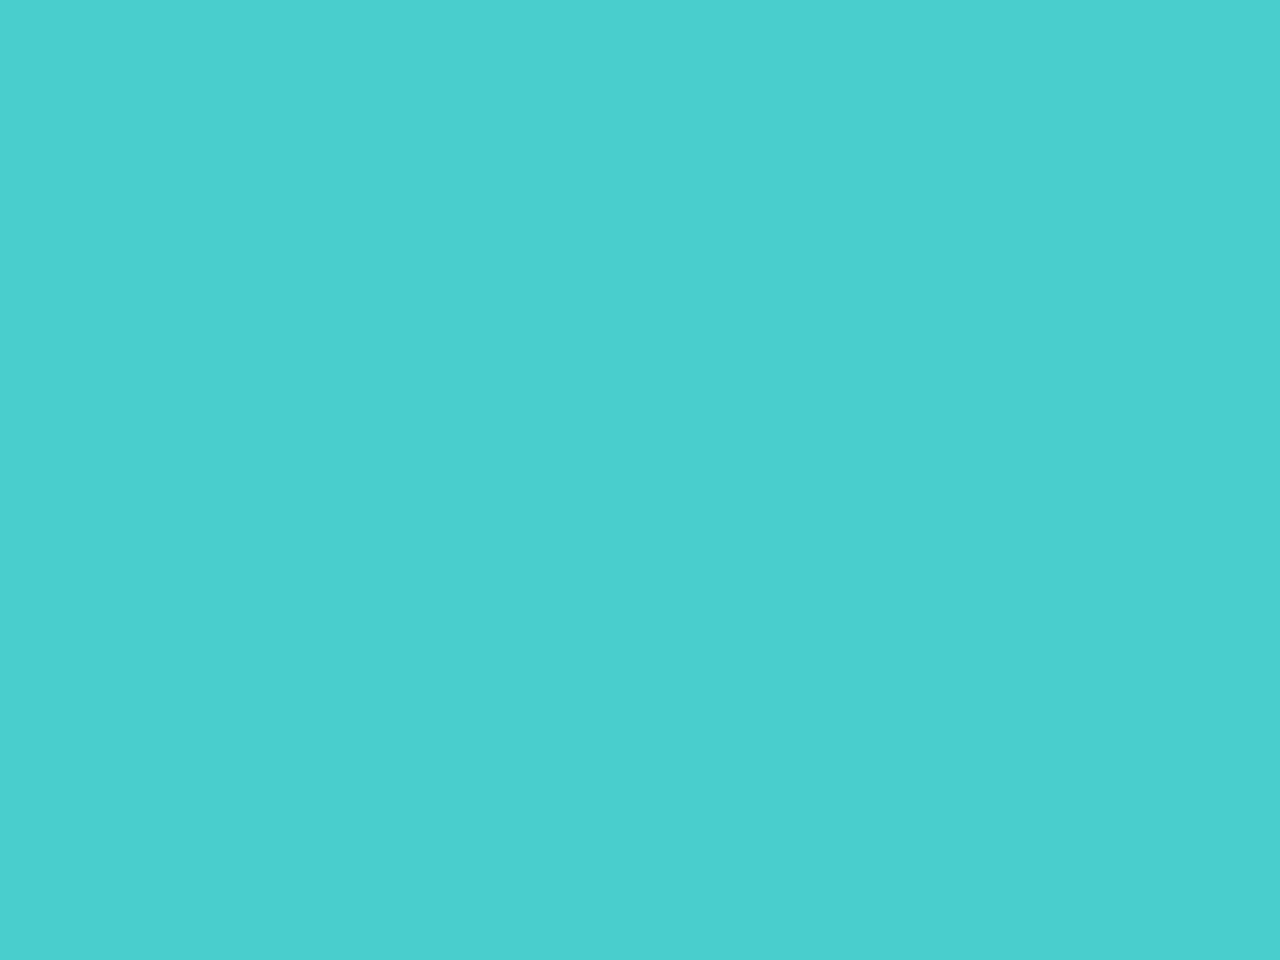 1280x960 Medium Turquoise Solid Color Background